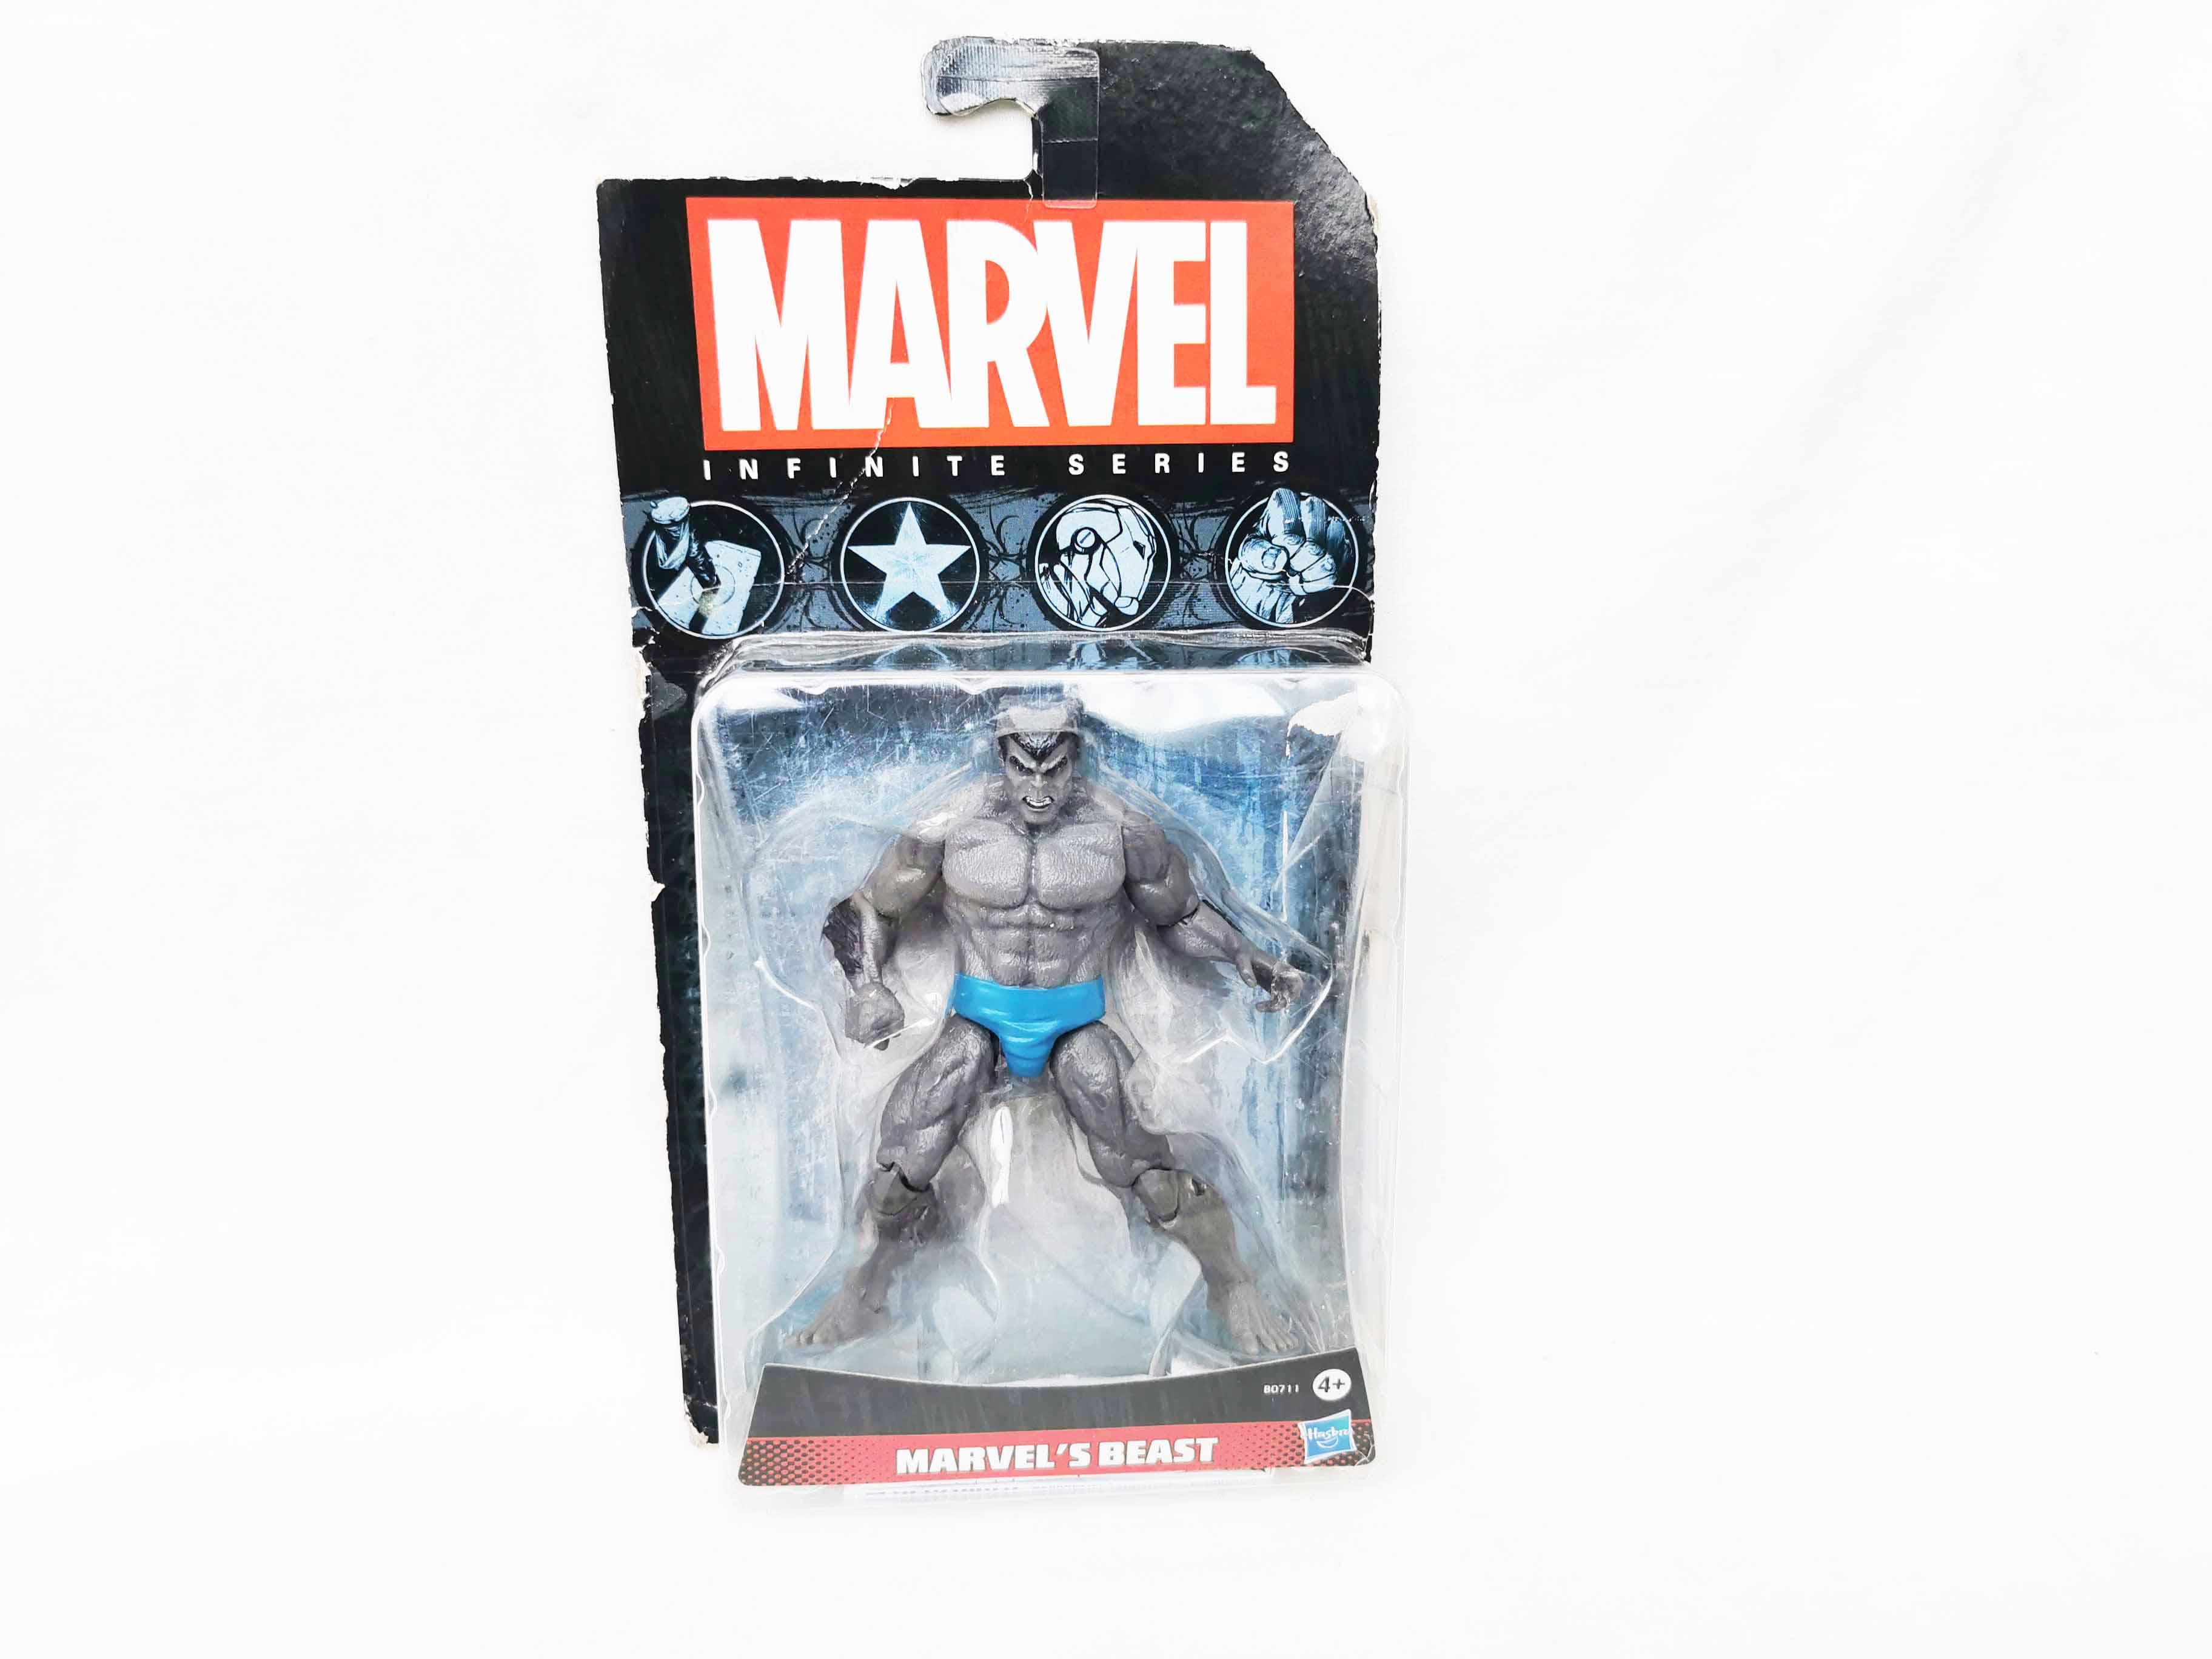 Beast X-men Grey version Marvel Universe Carded Action Figure 3.75 scale Hasbro